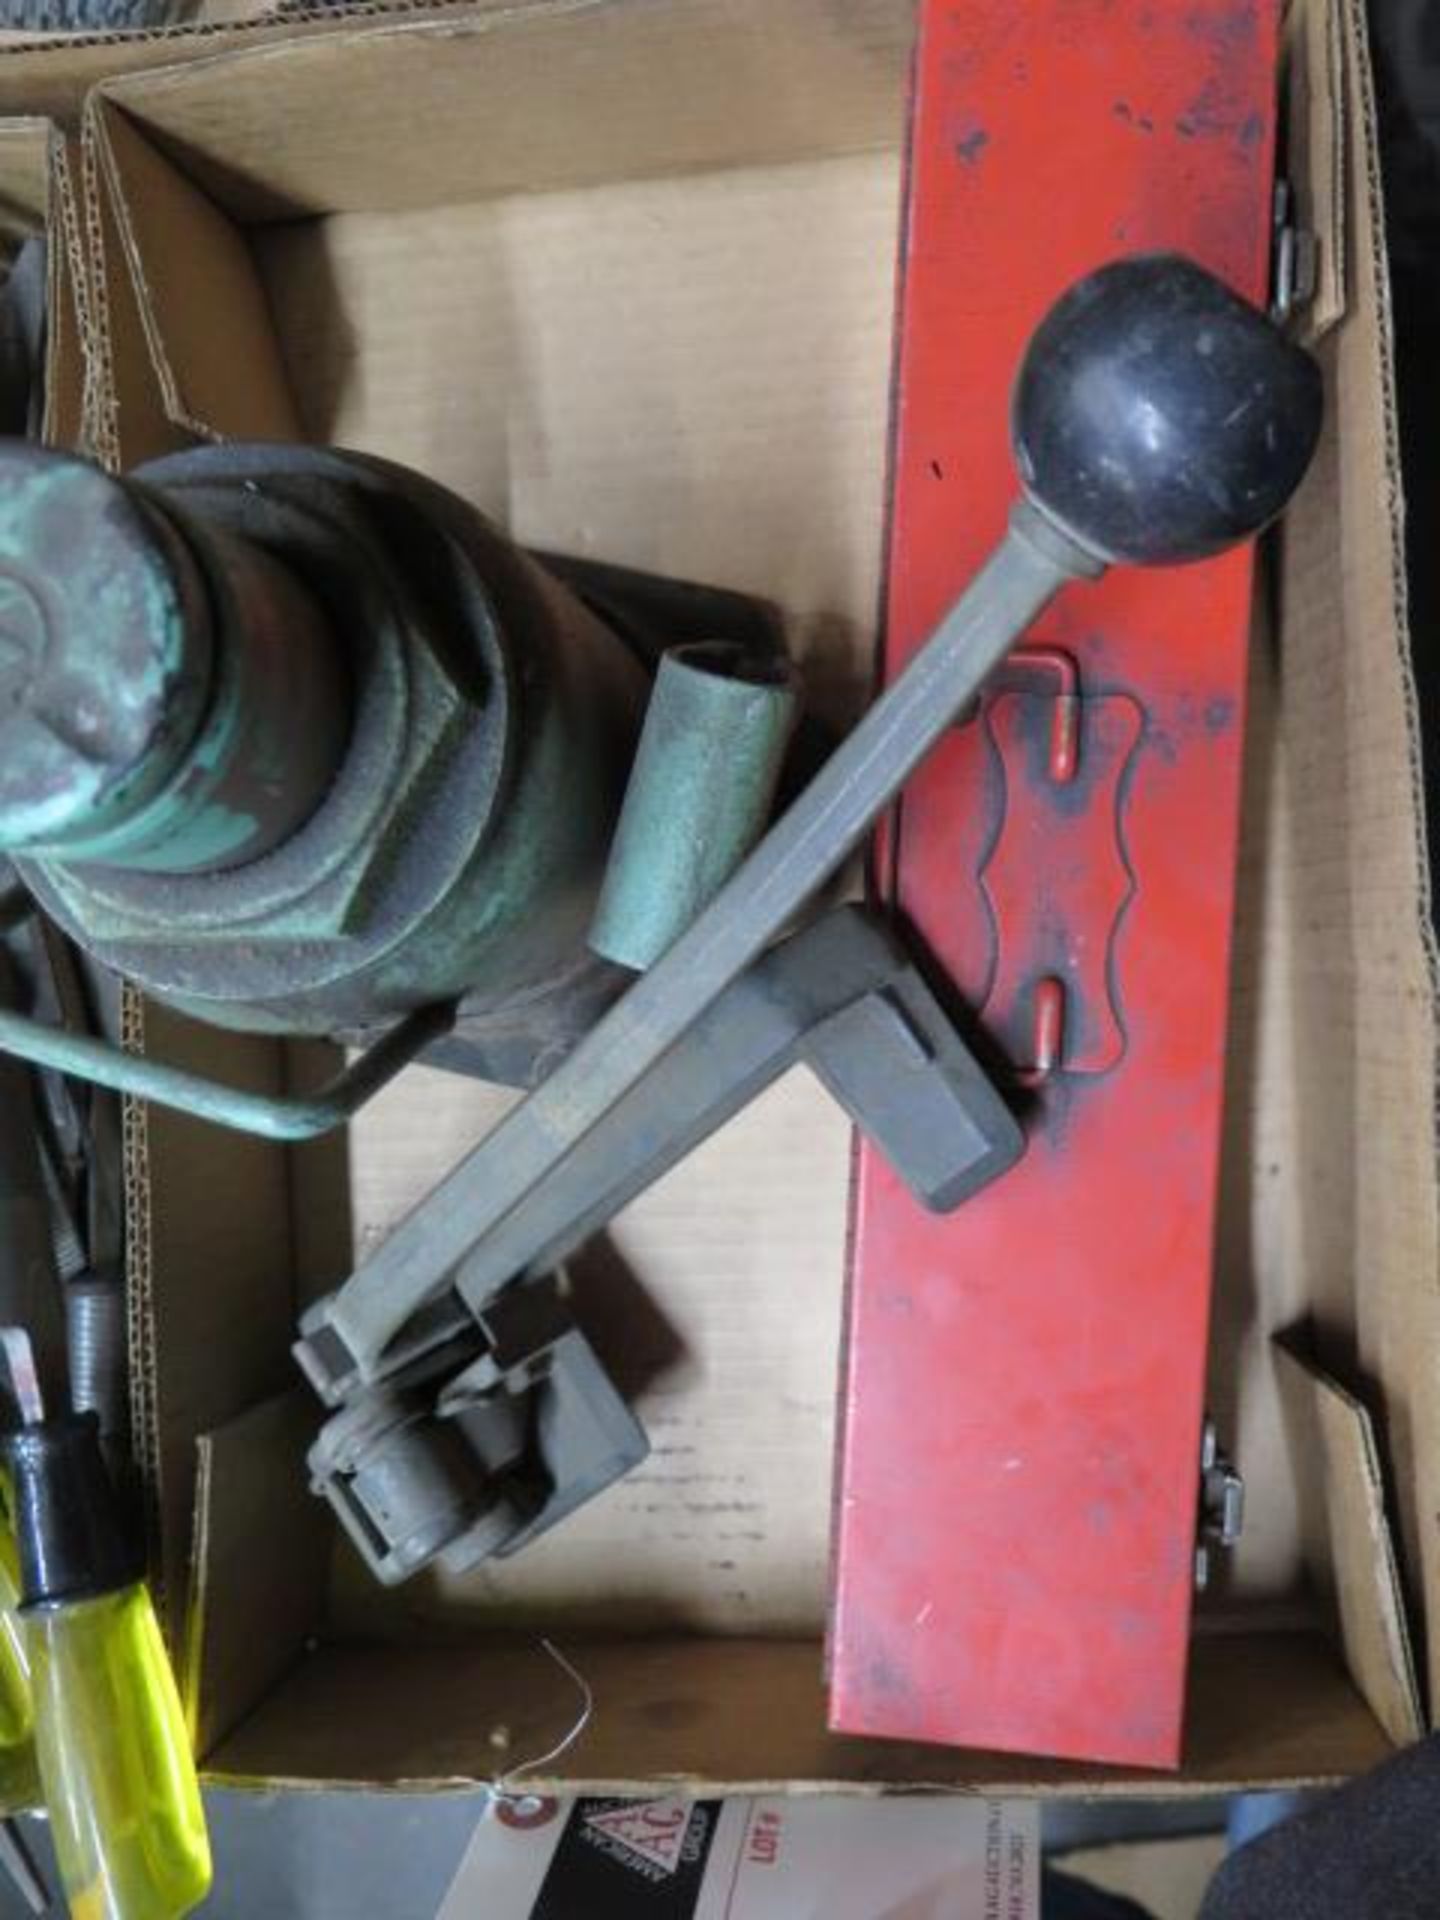 Hydraulic Bottle Jack, Slide Hammer and Banding Tool (SOLD AS-IS - NO WARRANTY) - Image 2 of 3